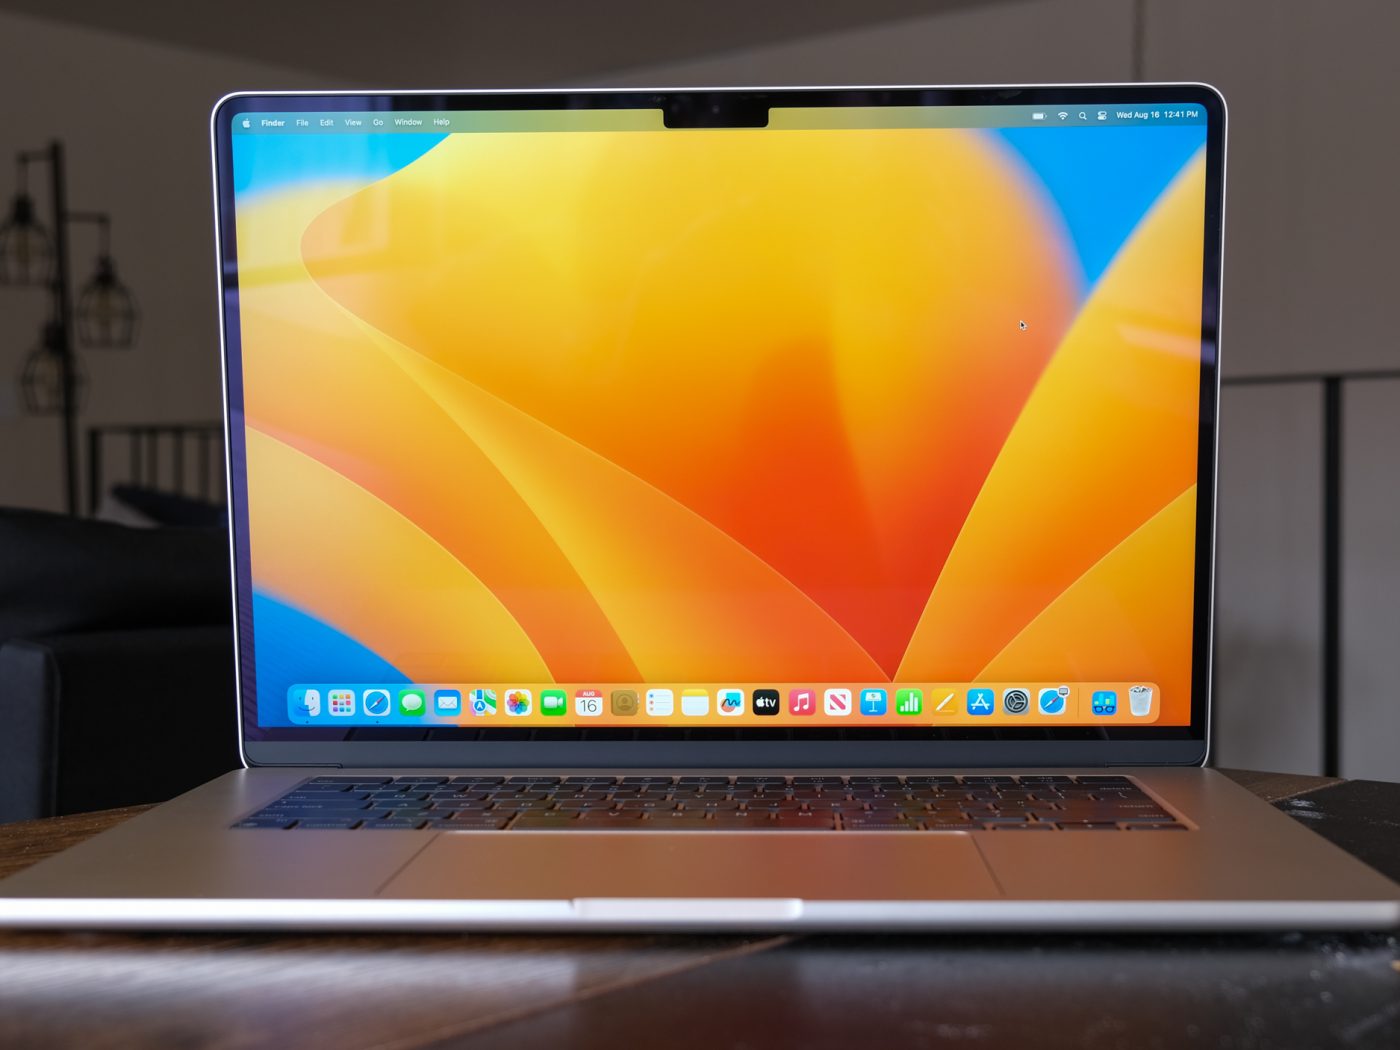 MacBook Air vs MacBook Pro (2019) - Which is the better buy? 